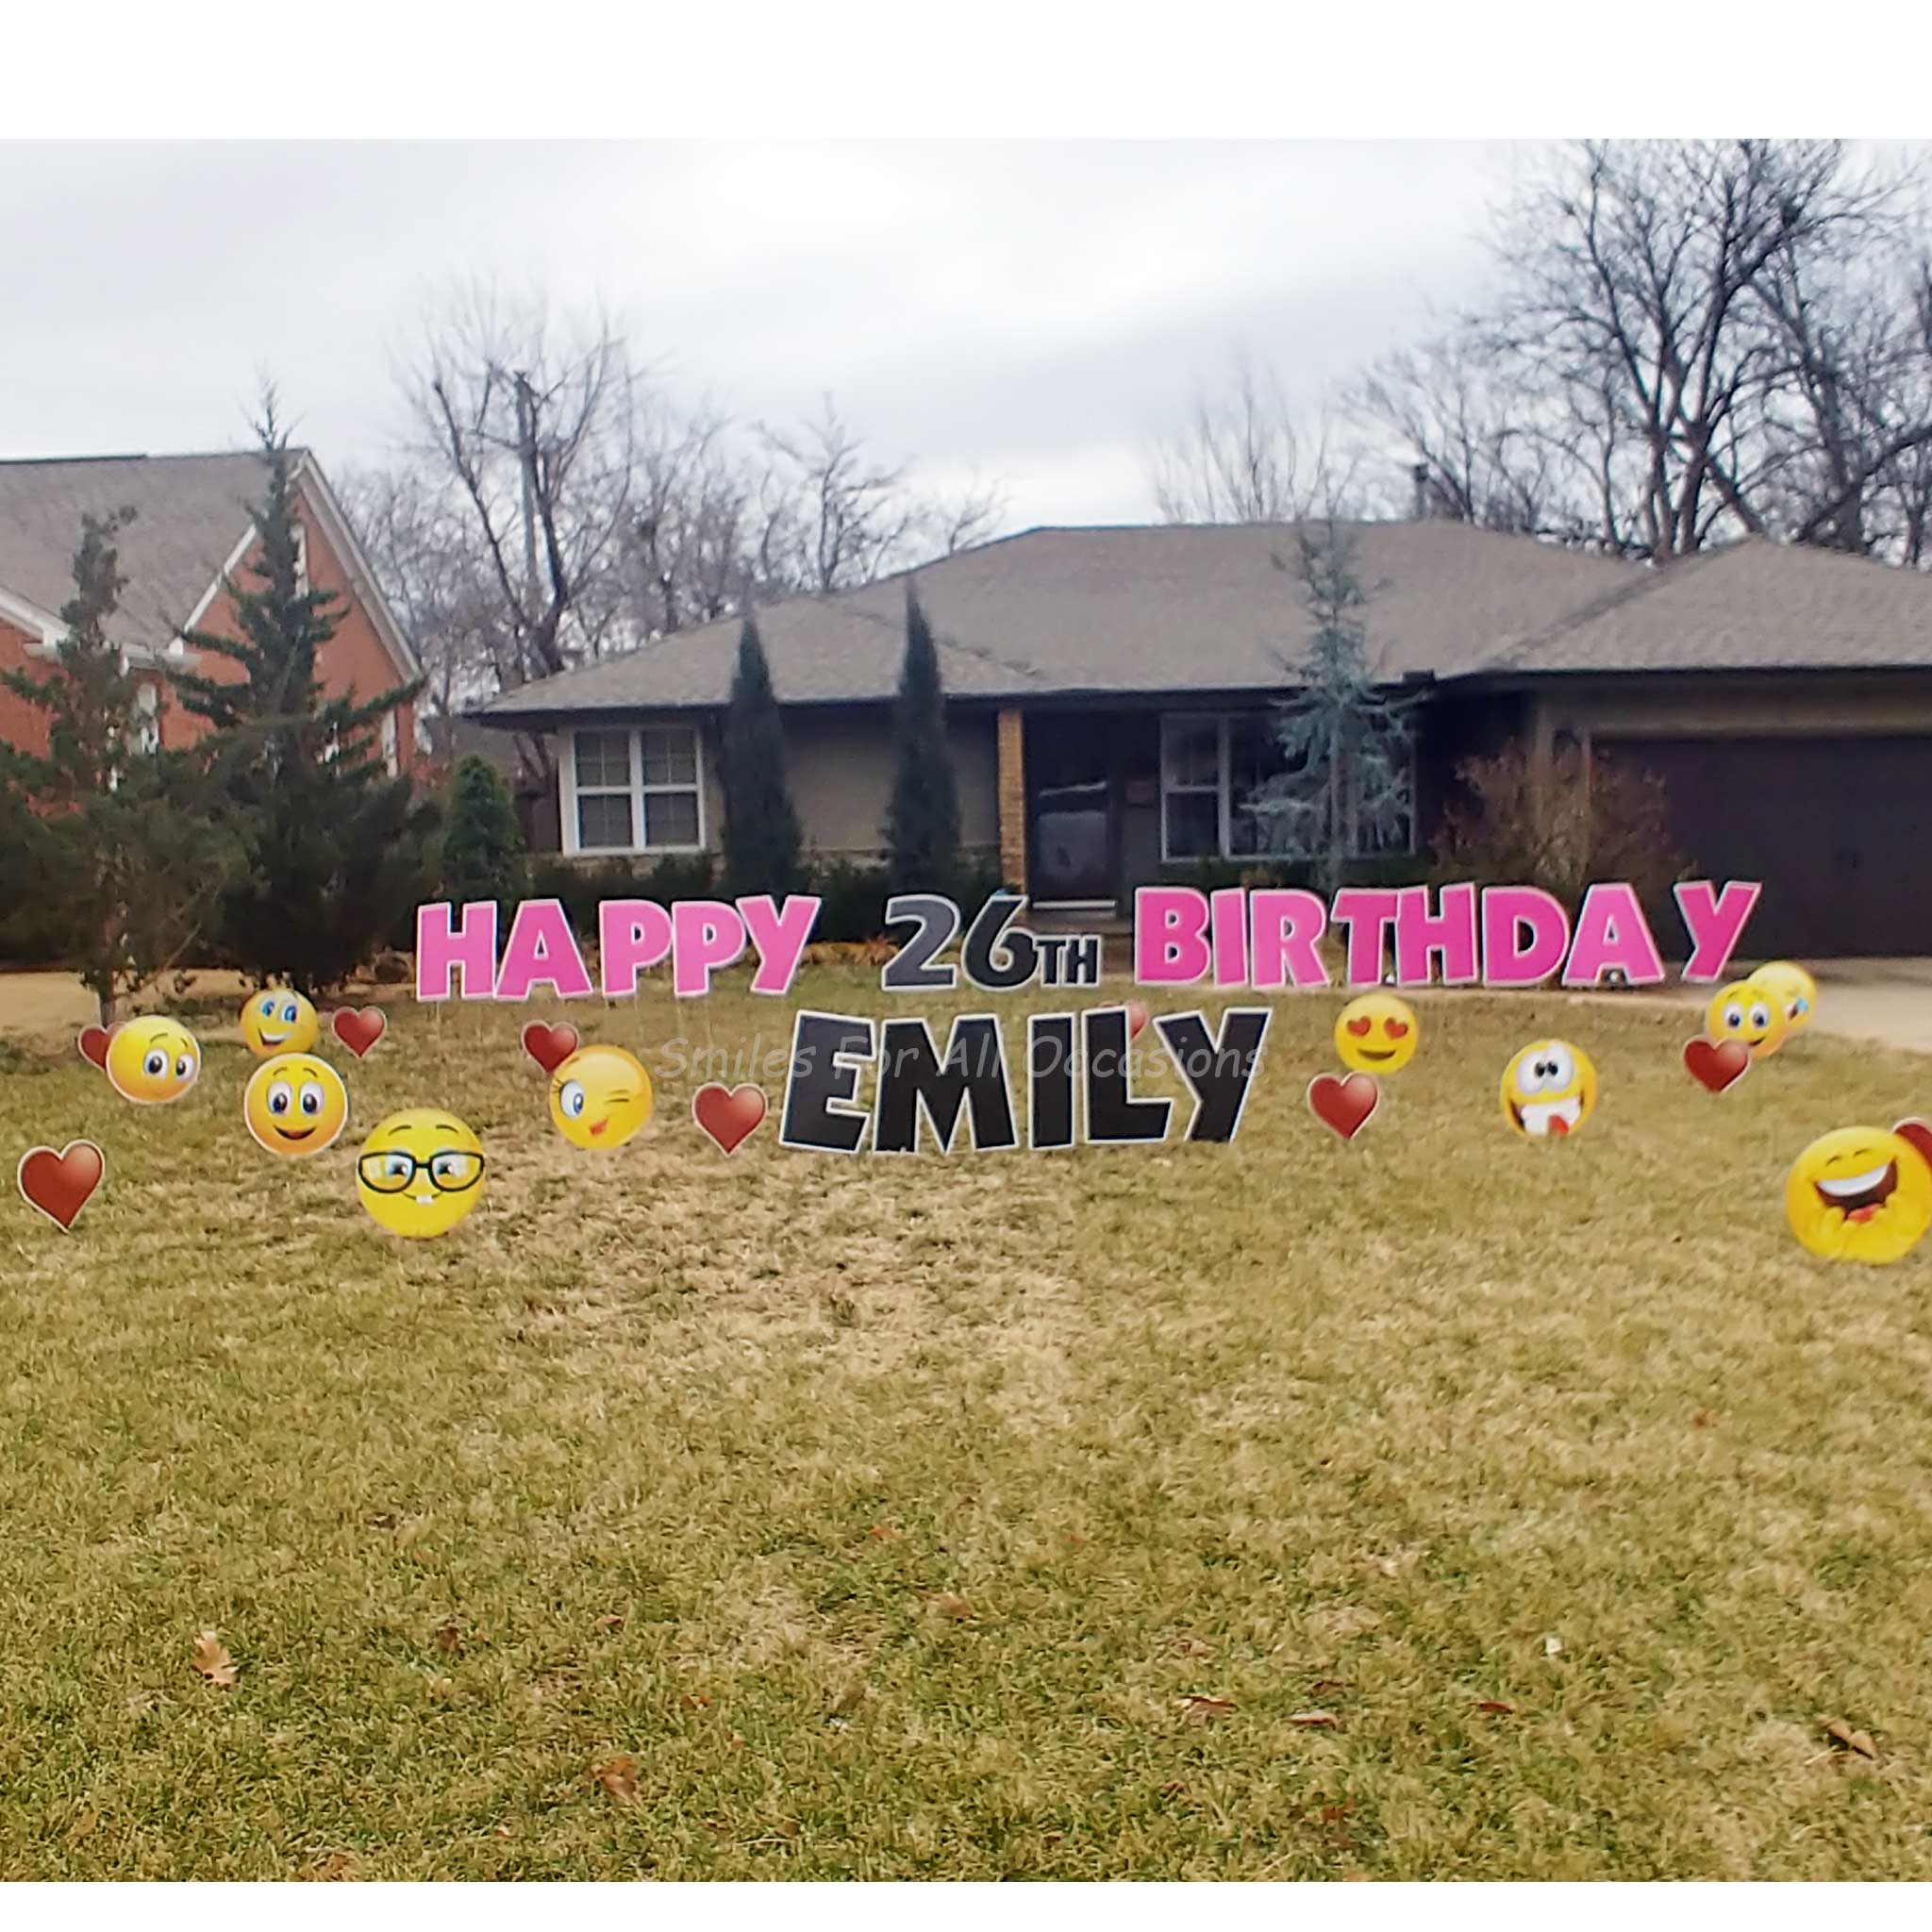 Women Underwear Birthday Yard Signs – Smiles For All Occasions